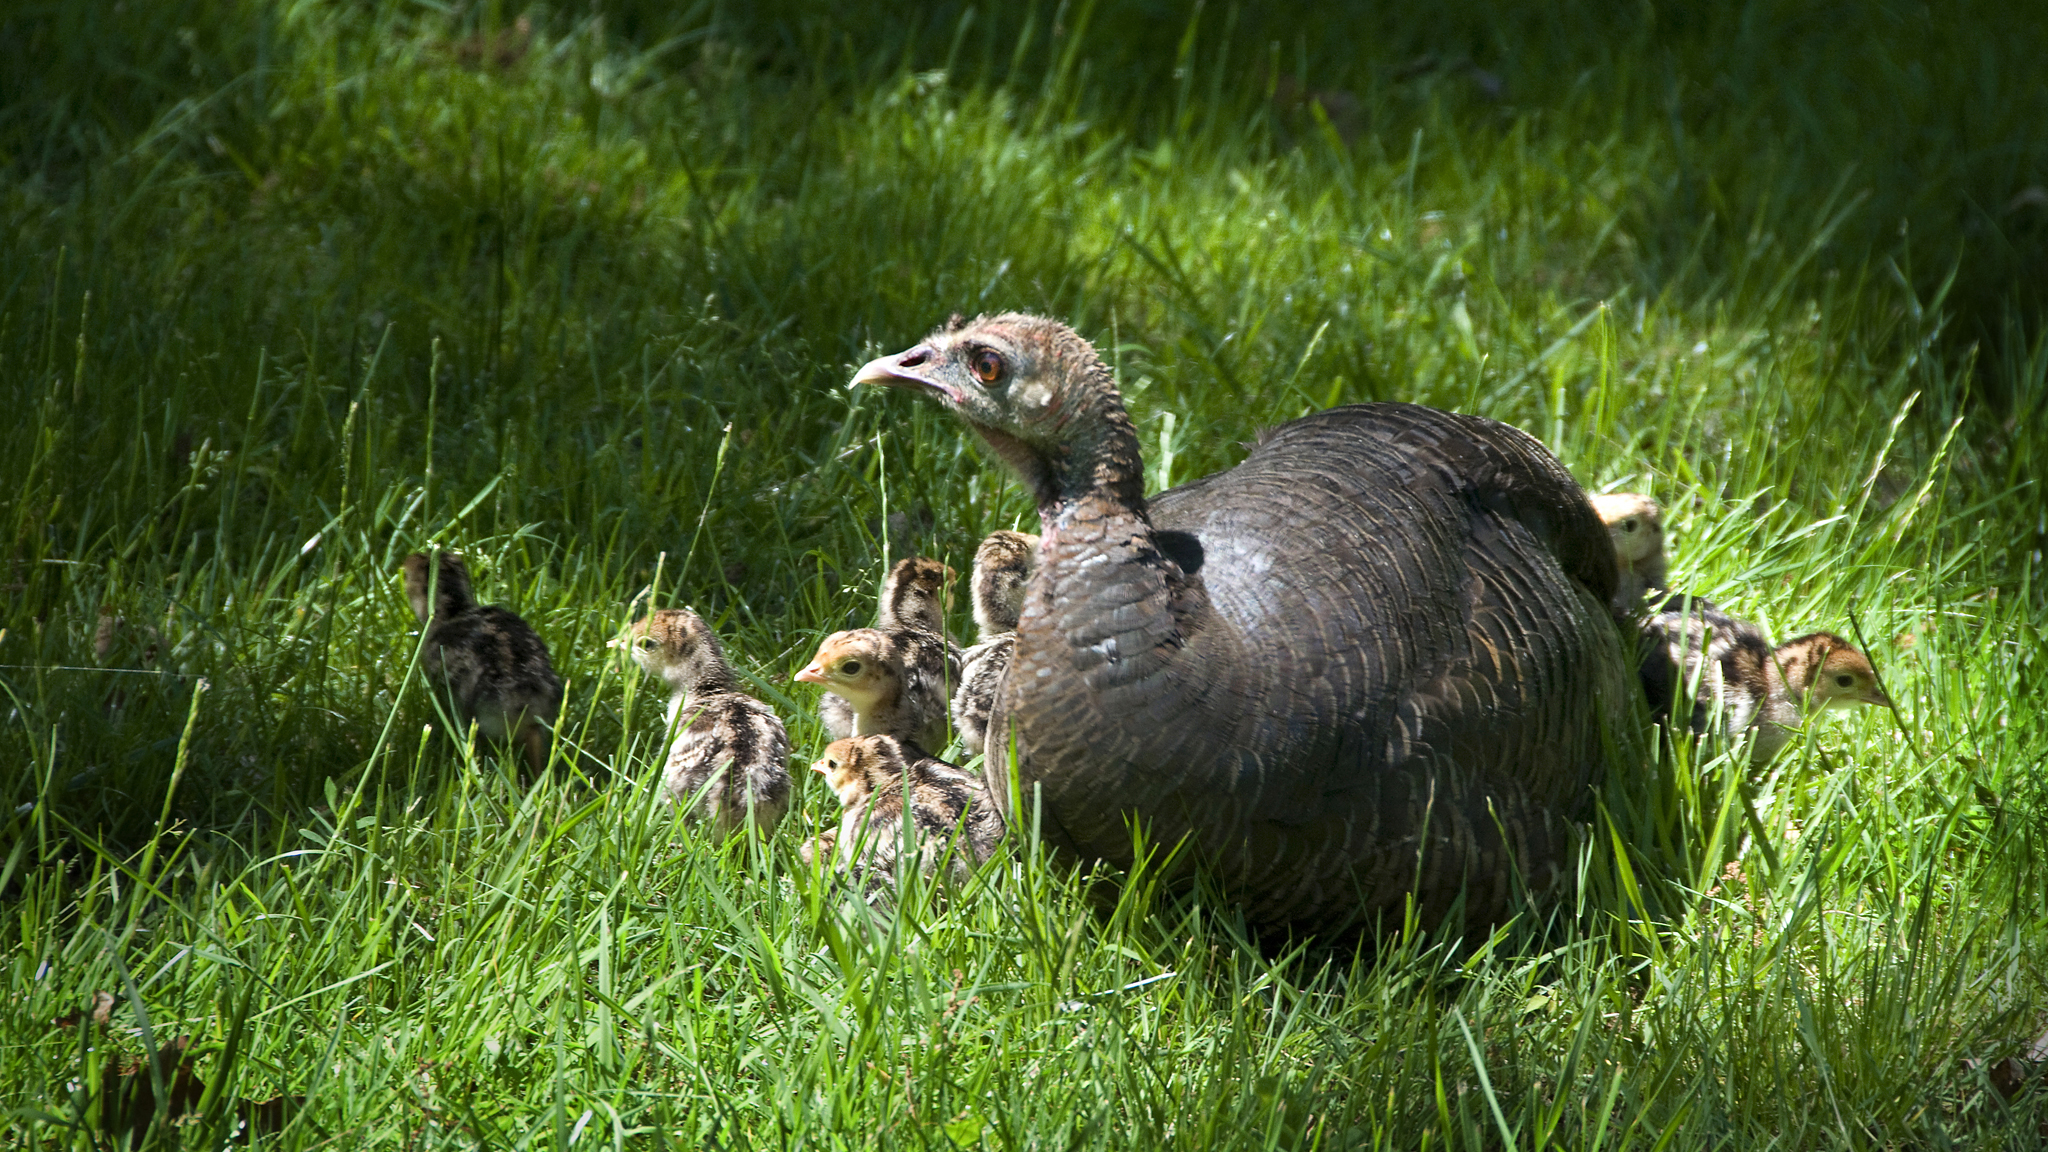 A wild turkey with her young poults. Photo © Brookhaven National Laboratory/ Flickr through a Creative Commons license